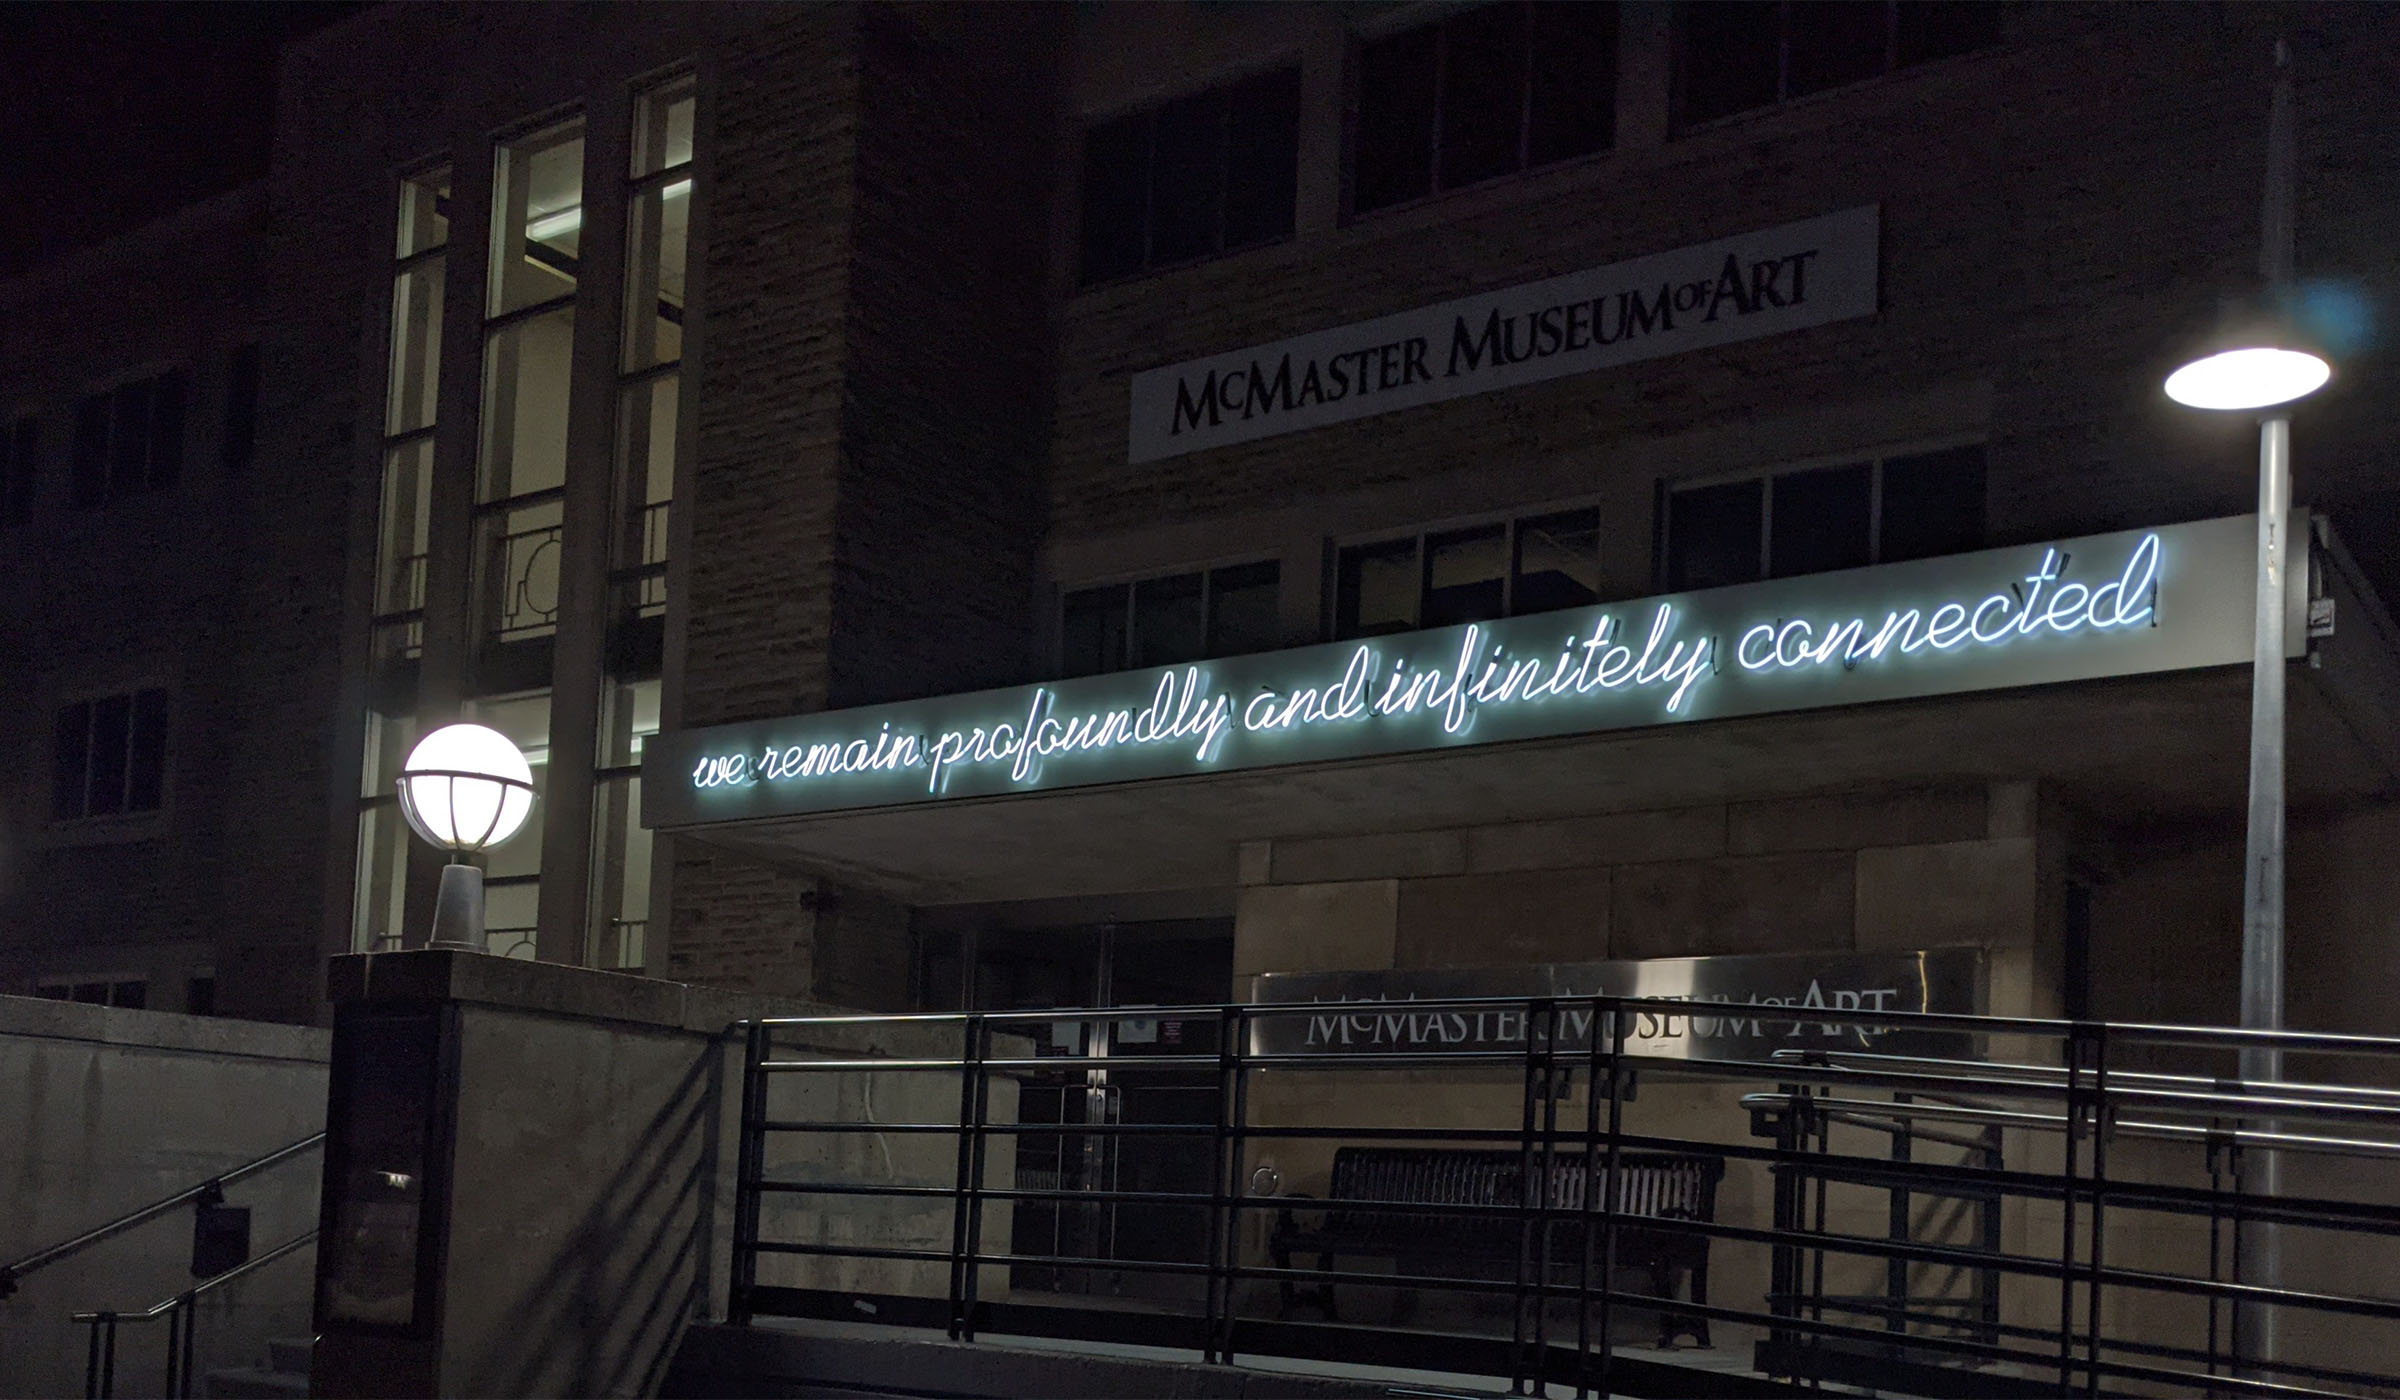 Neon sculpture that reads 'we remain profoundly and infinitely connected' on the facade of the museum